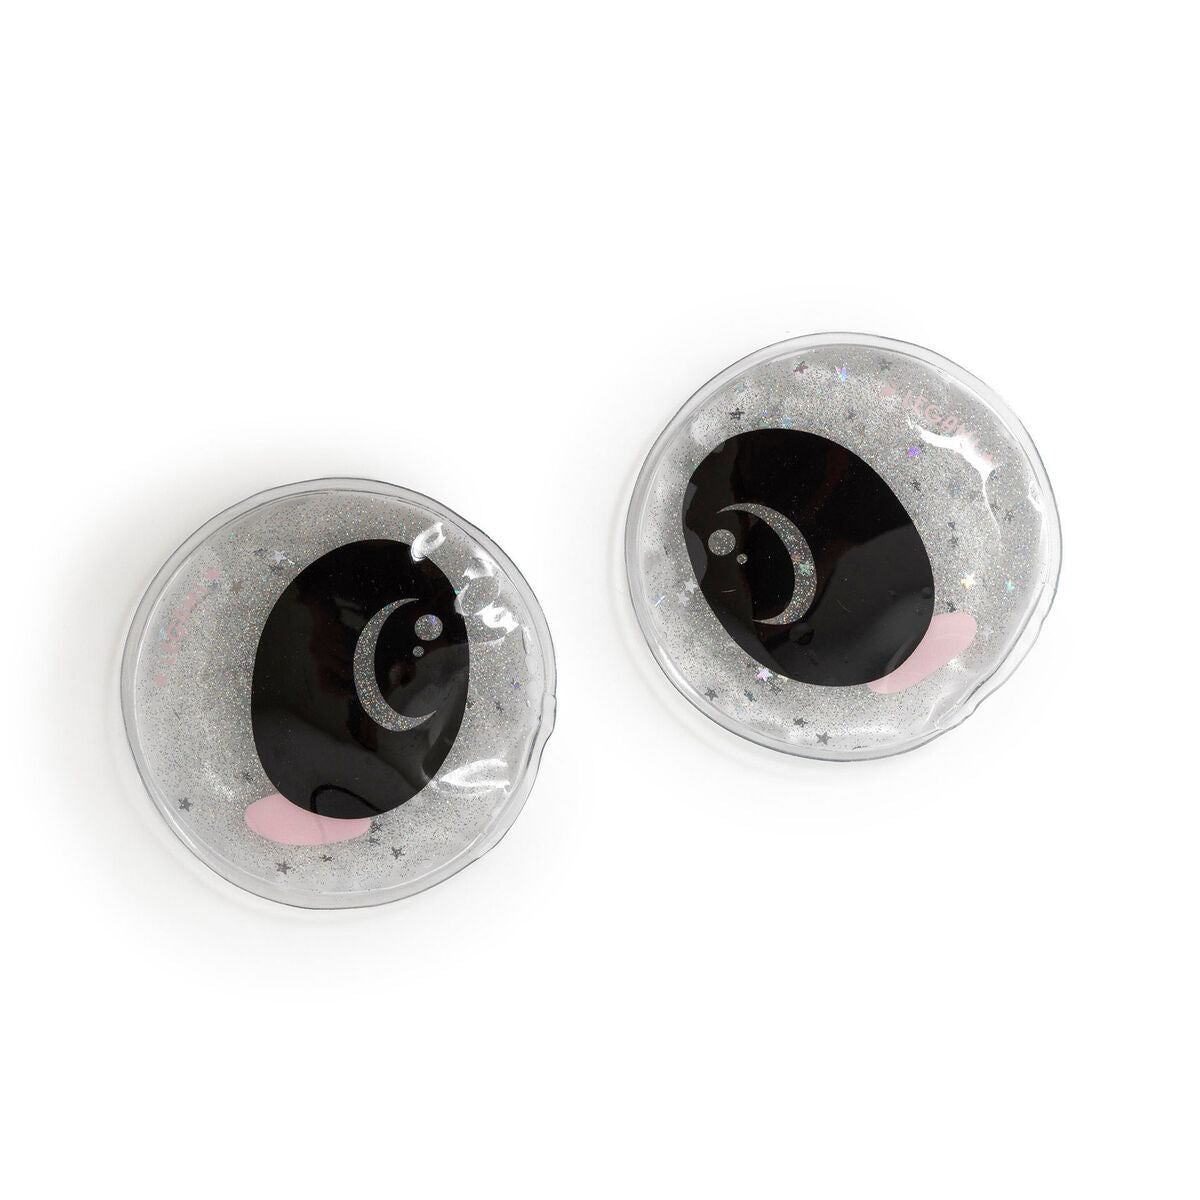 Chill Out - 2 Reusable Cooling Eye Pads - Panda